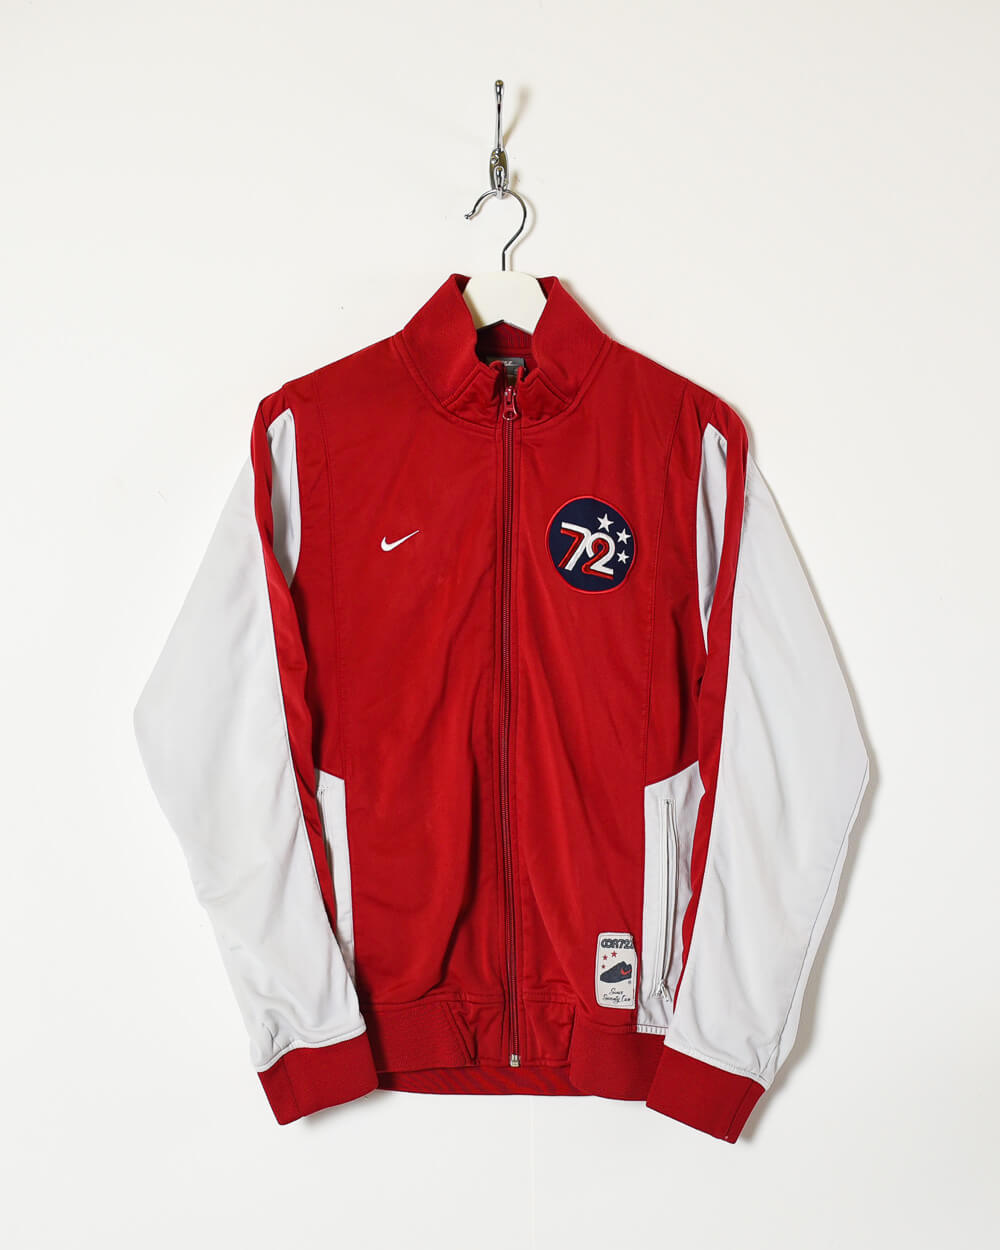 Red Nike 72 Tracksuit Top - Small